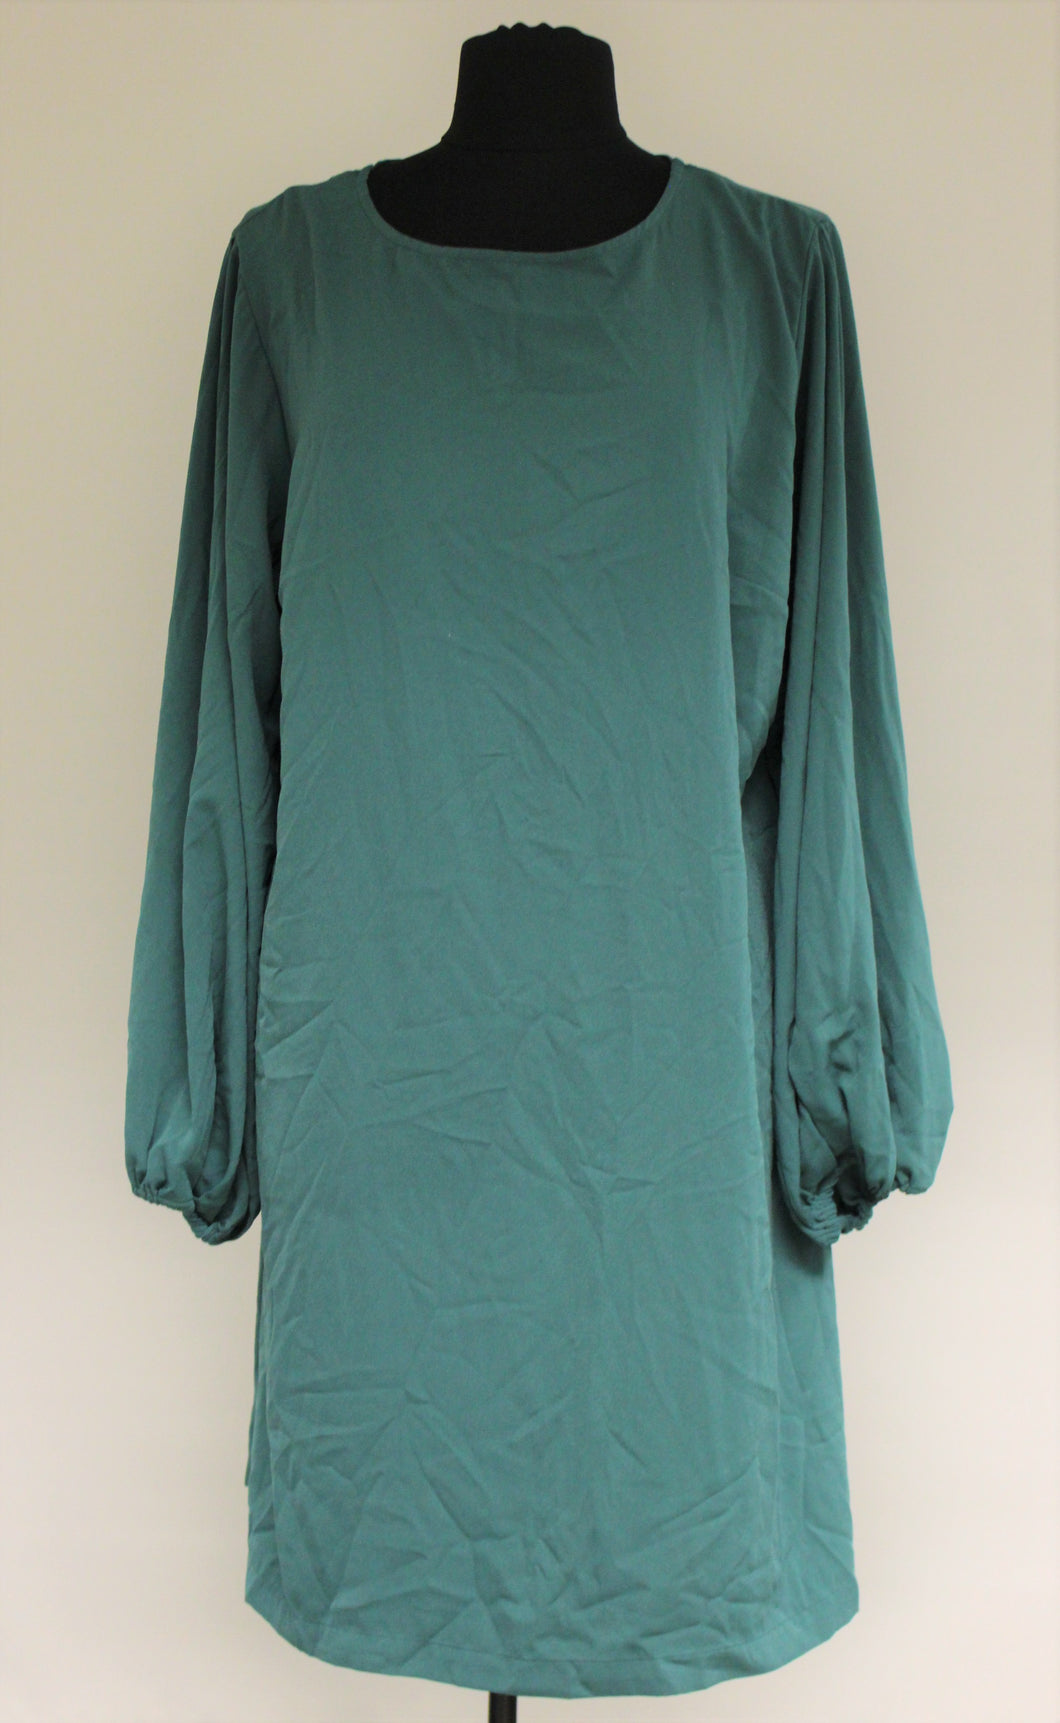 A New Day Women's Long Sleeve Dress - Dark Teal - Small - New